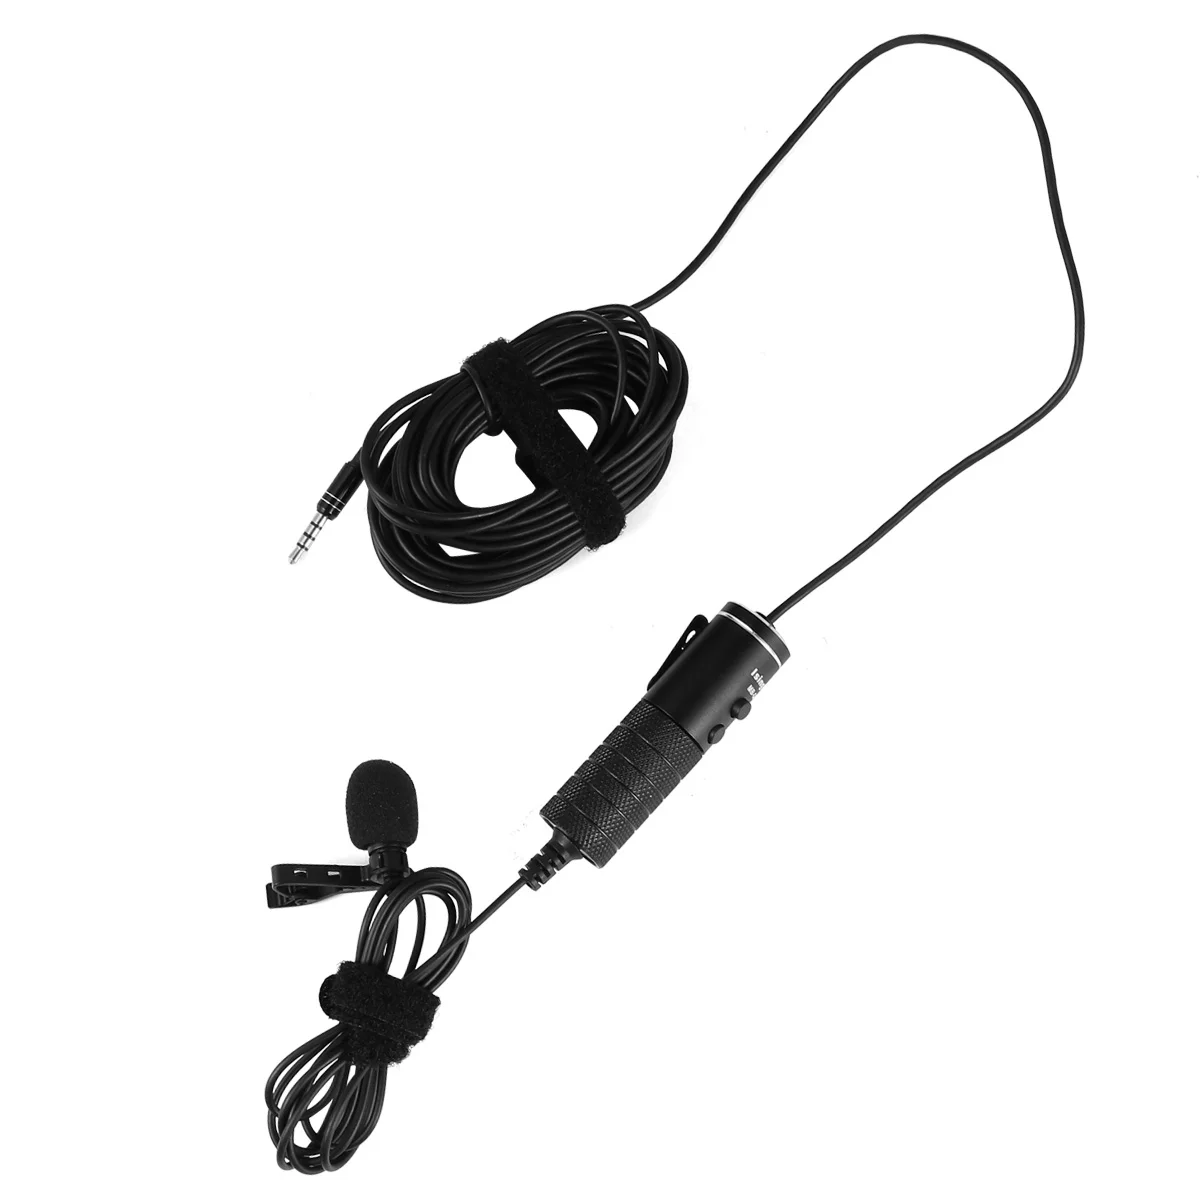 

Lavalier Microphone Clip on Microphone Lapel Hands- free Omnidirectional Condenser Microphone for Desktop Computer Laptop